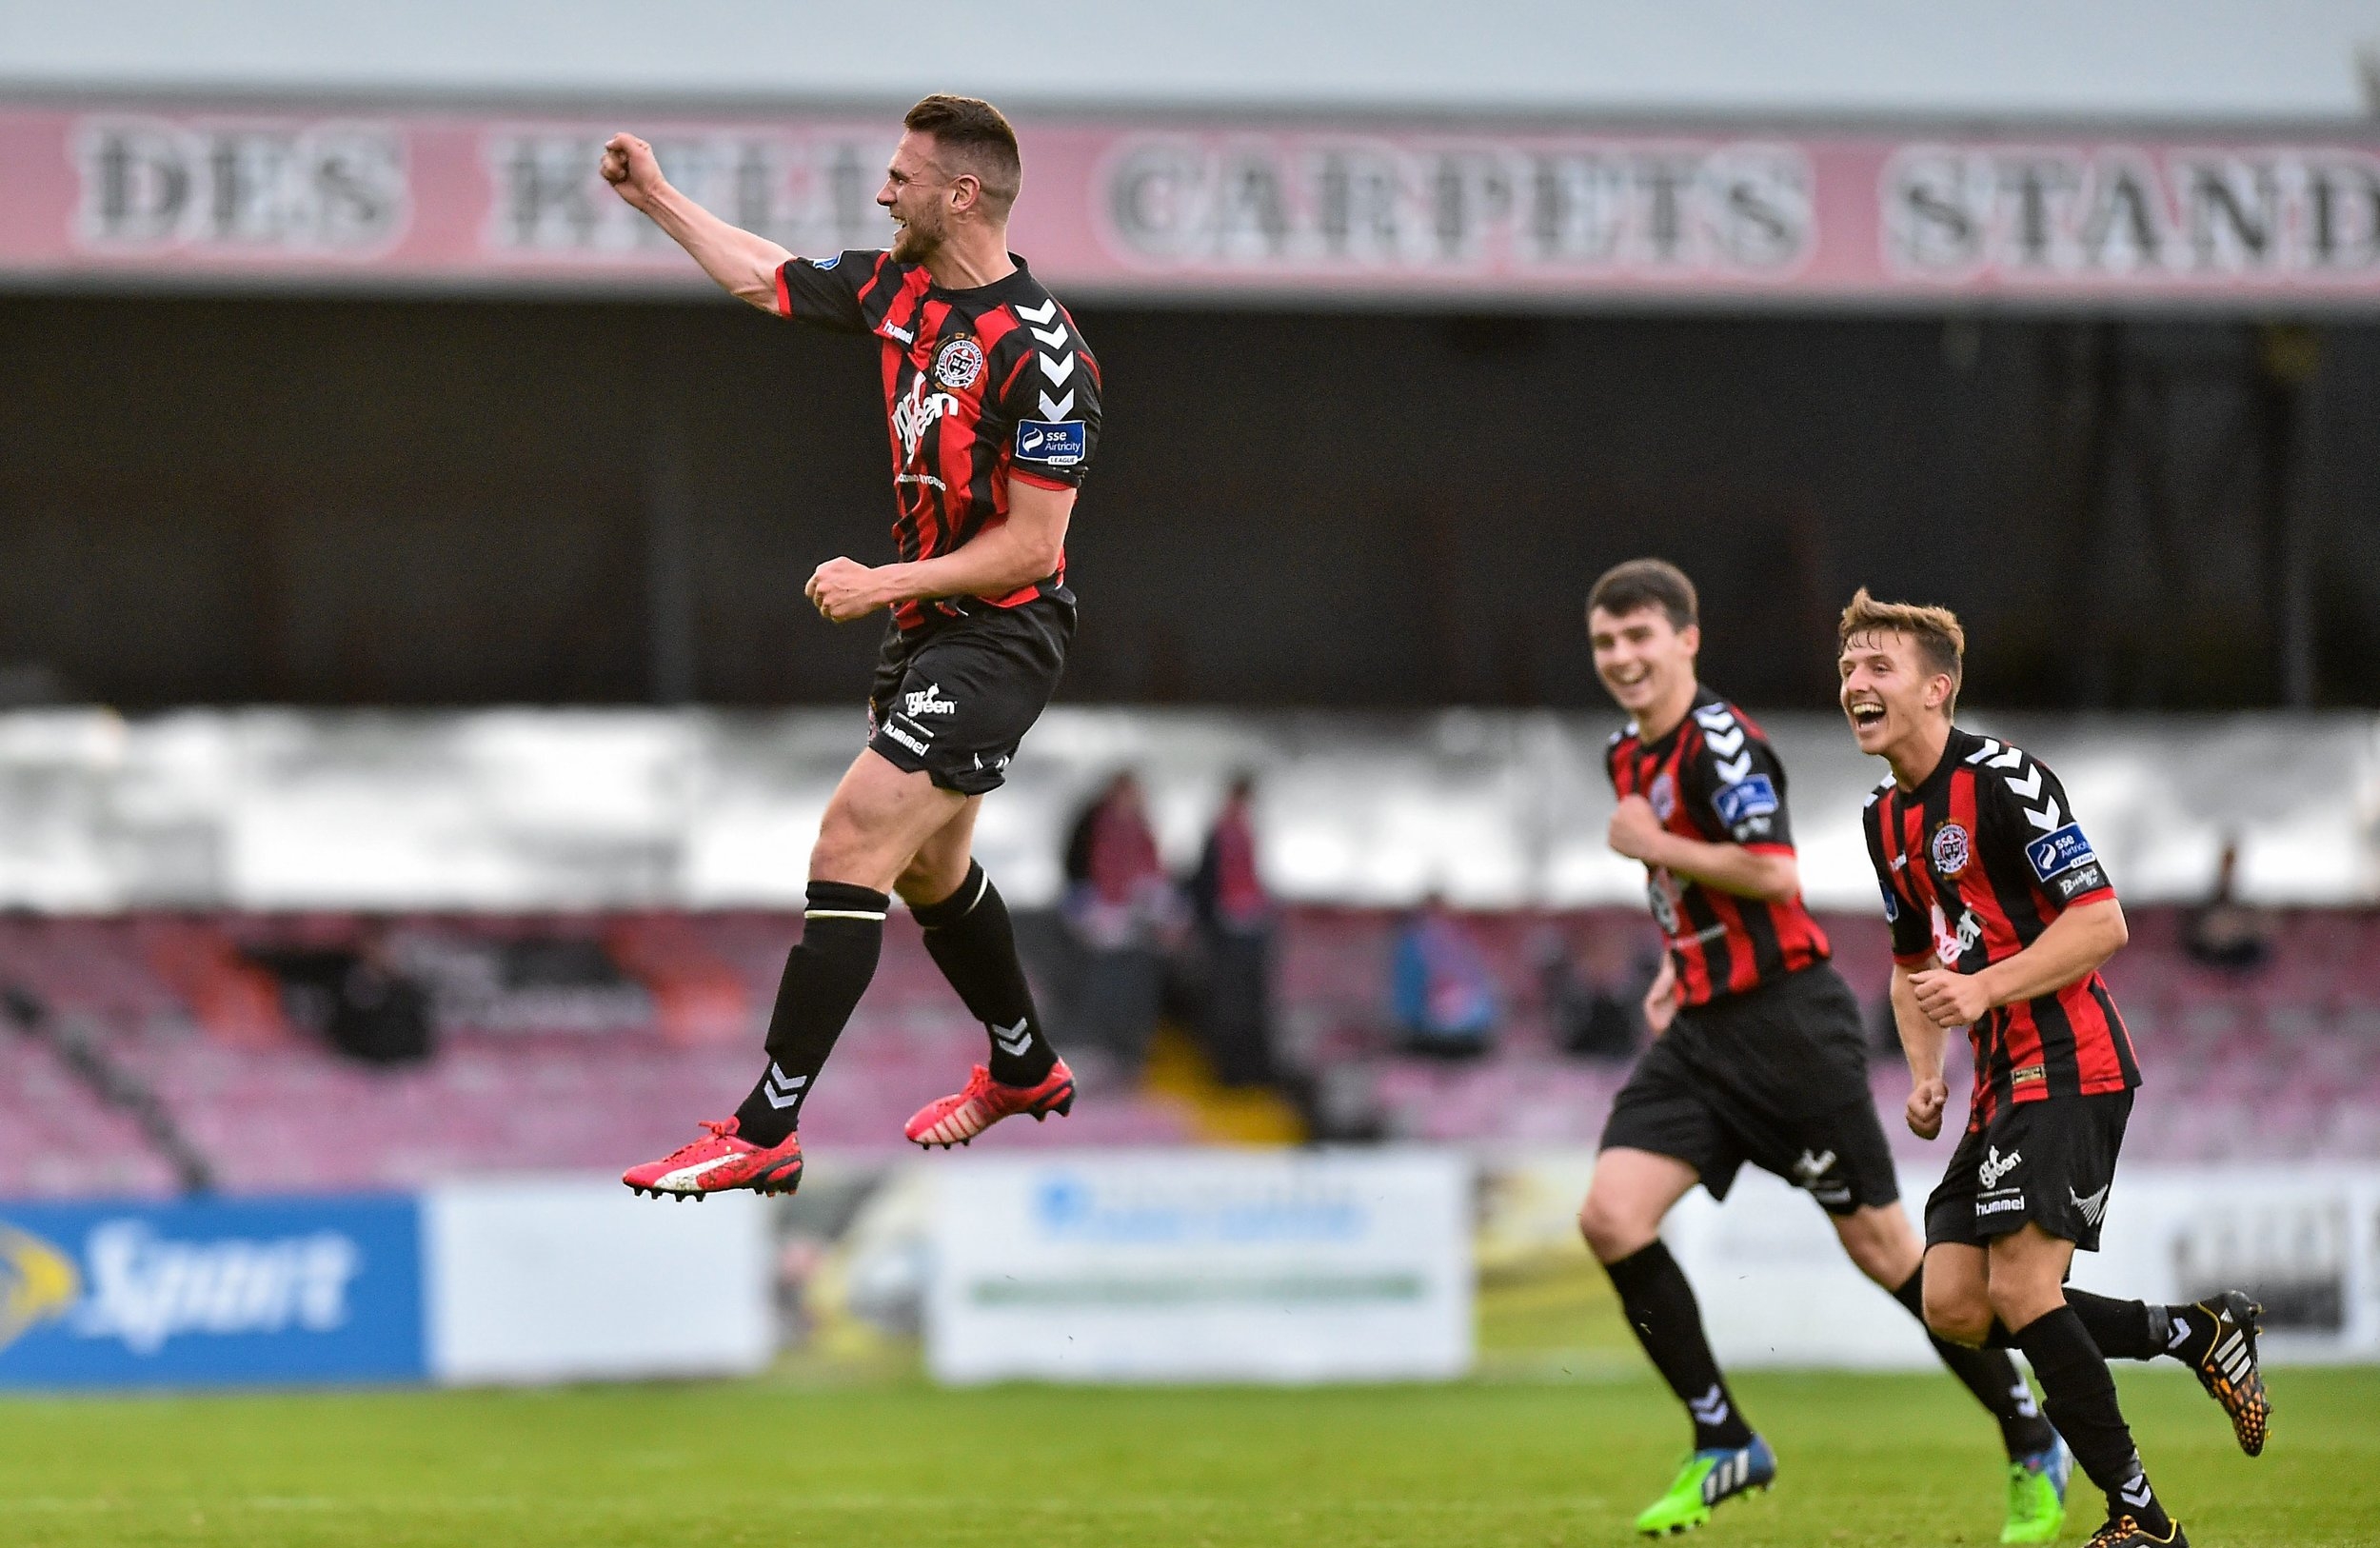  Robbie Creevy of Bohemians celebrates scoring his side's fourth goal against Derry City at Dalymount Park in Dublin 2015 /&nbsp; Sportsfile  